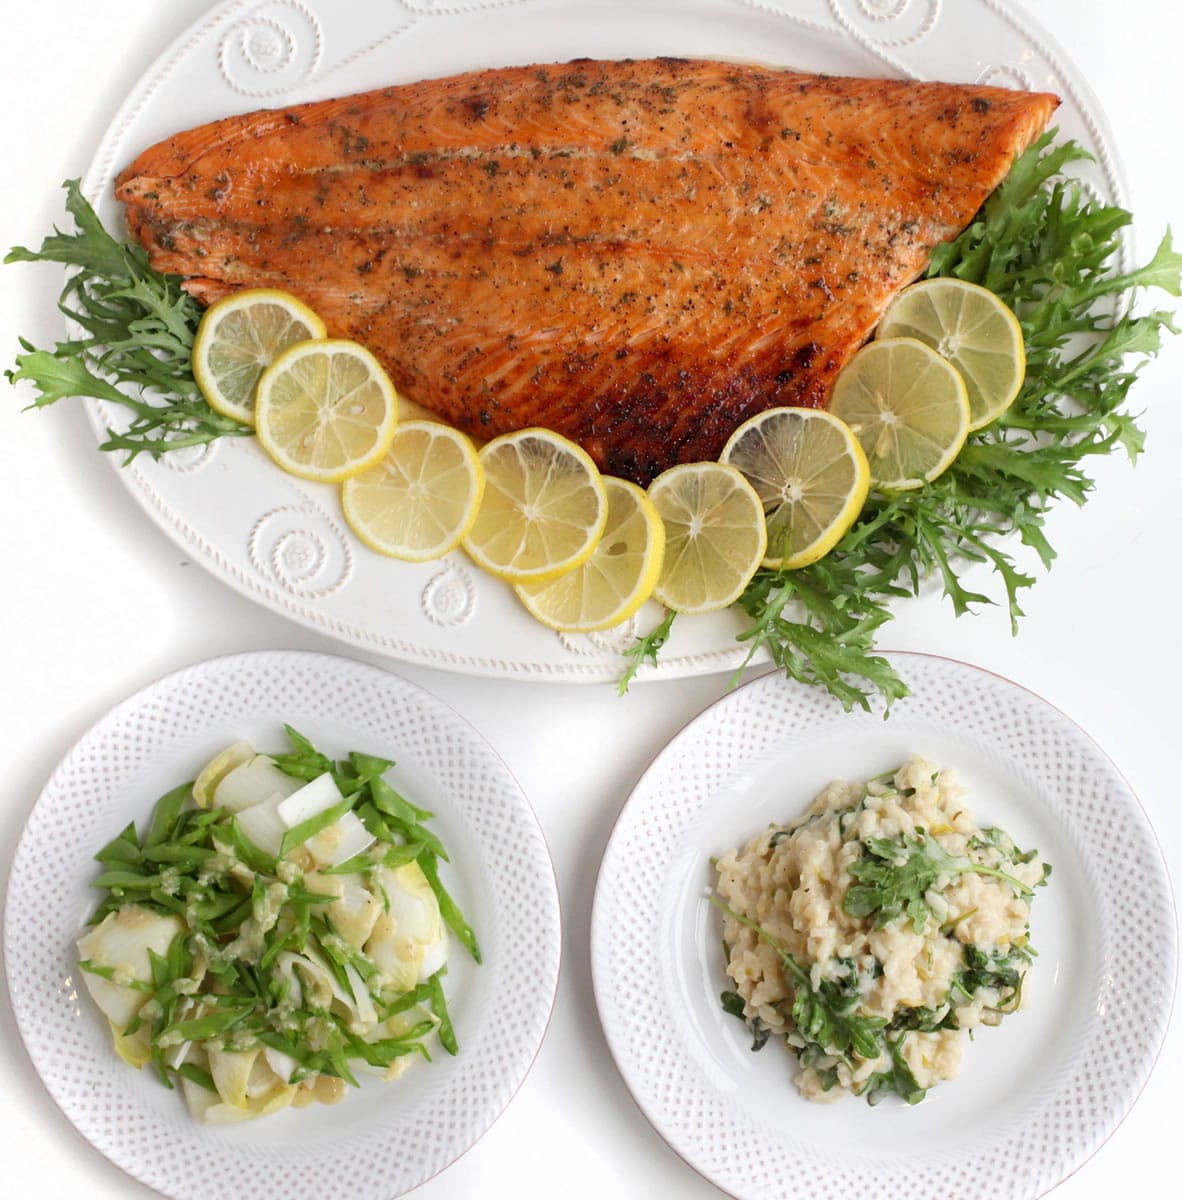 Maple glazed salmon serves as the centerpiece of this meal with leeks and kale risotto.